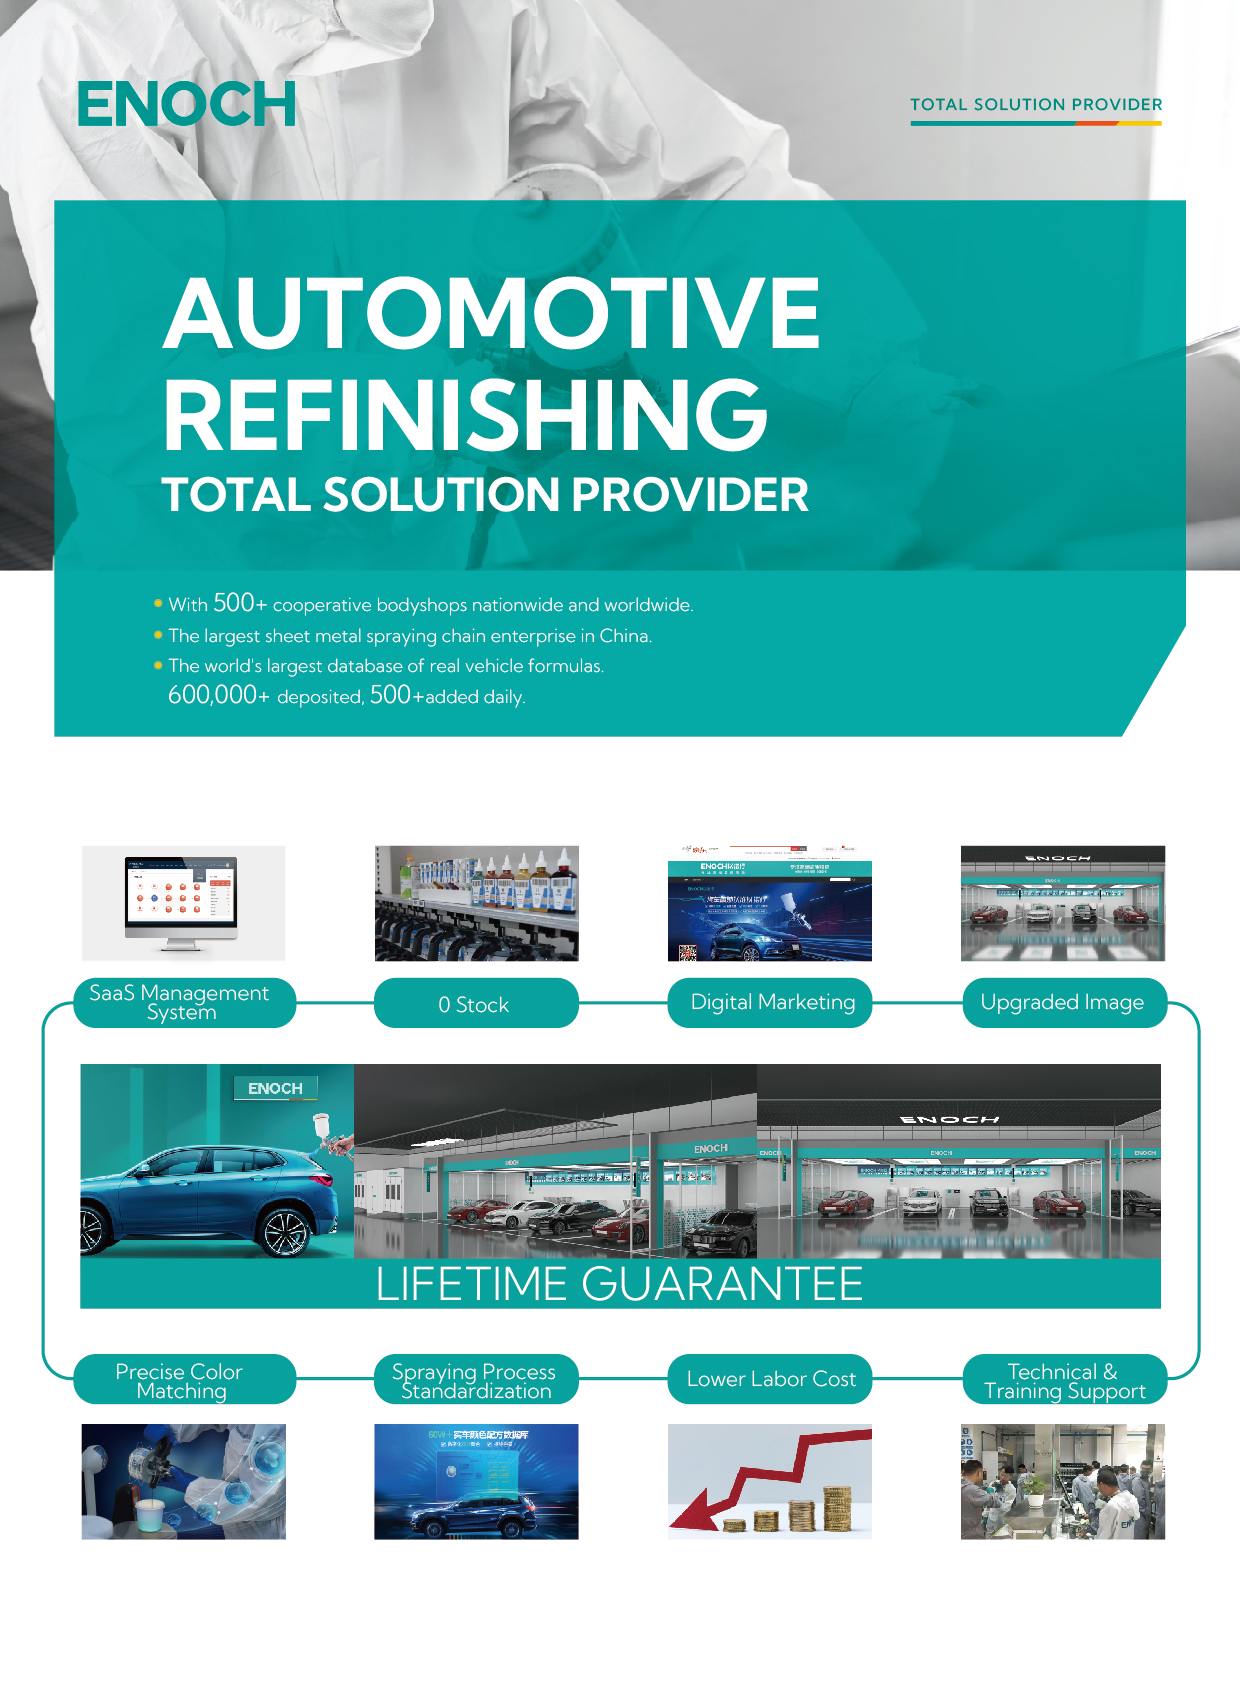 Enoch Automotive Refinishing Total Solution Provider Excellent Intelligent Car Refinish System